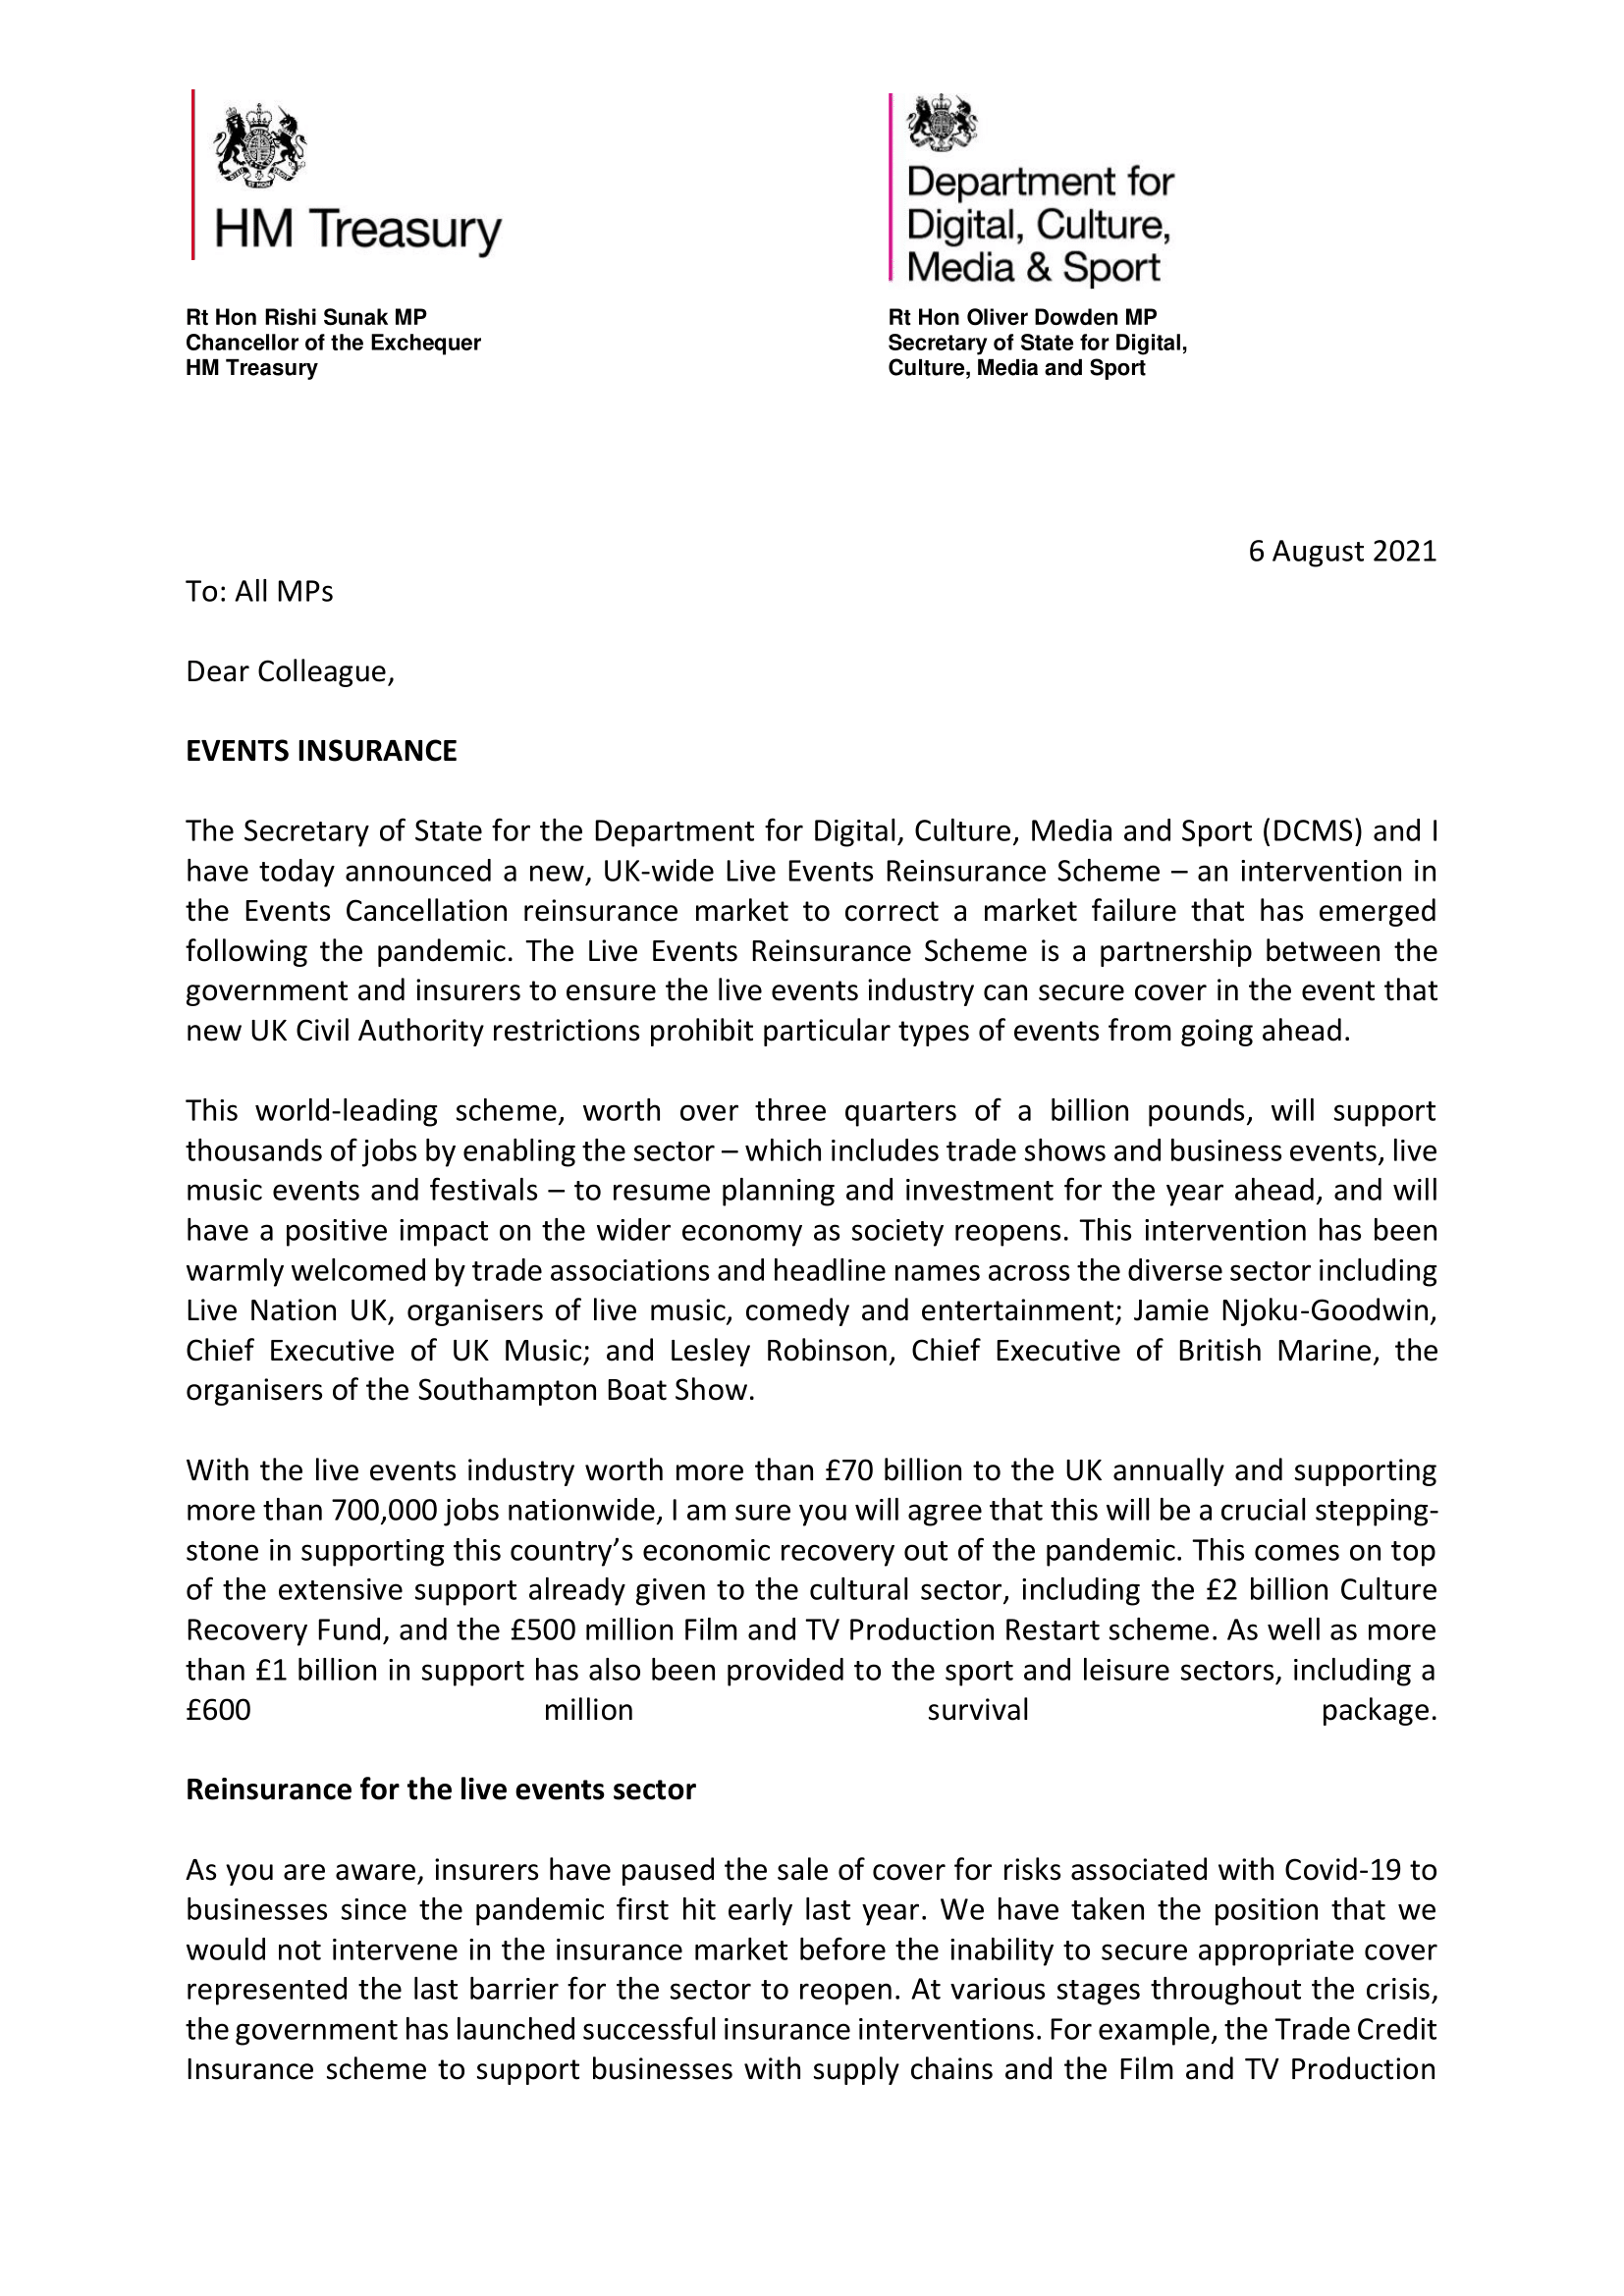 Letter from Chancellor and DCMS Secretary on Live Events Reinsurance Scheme